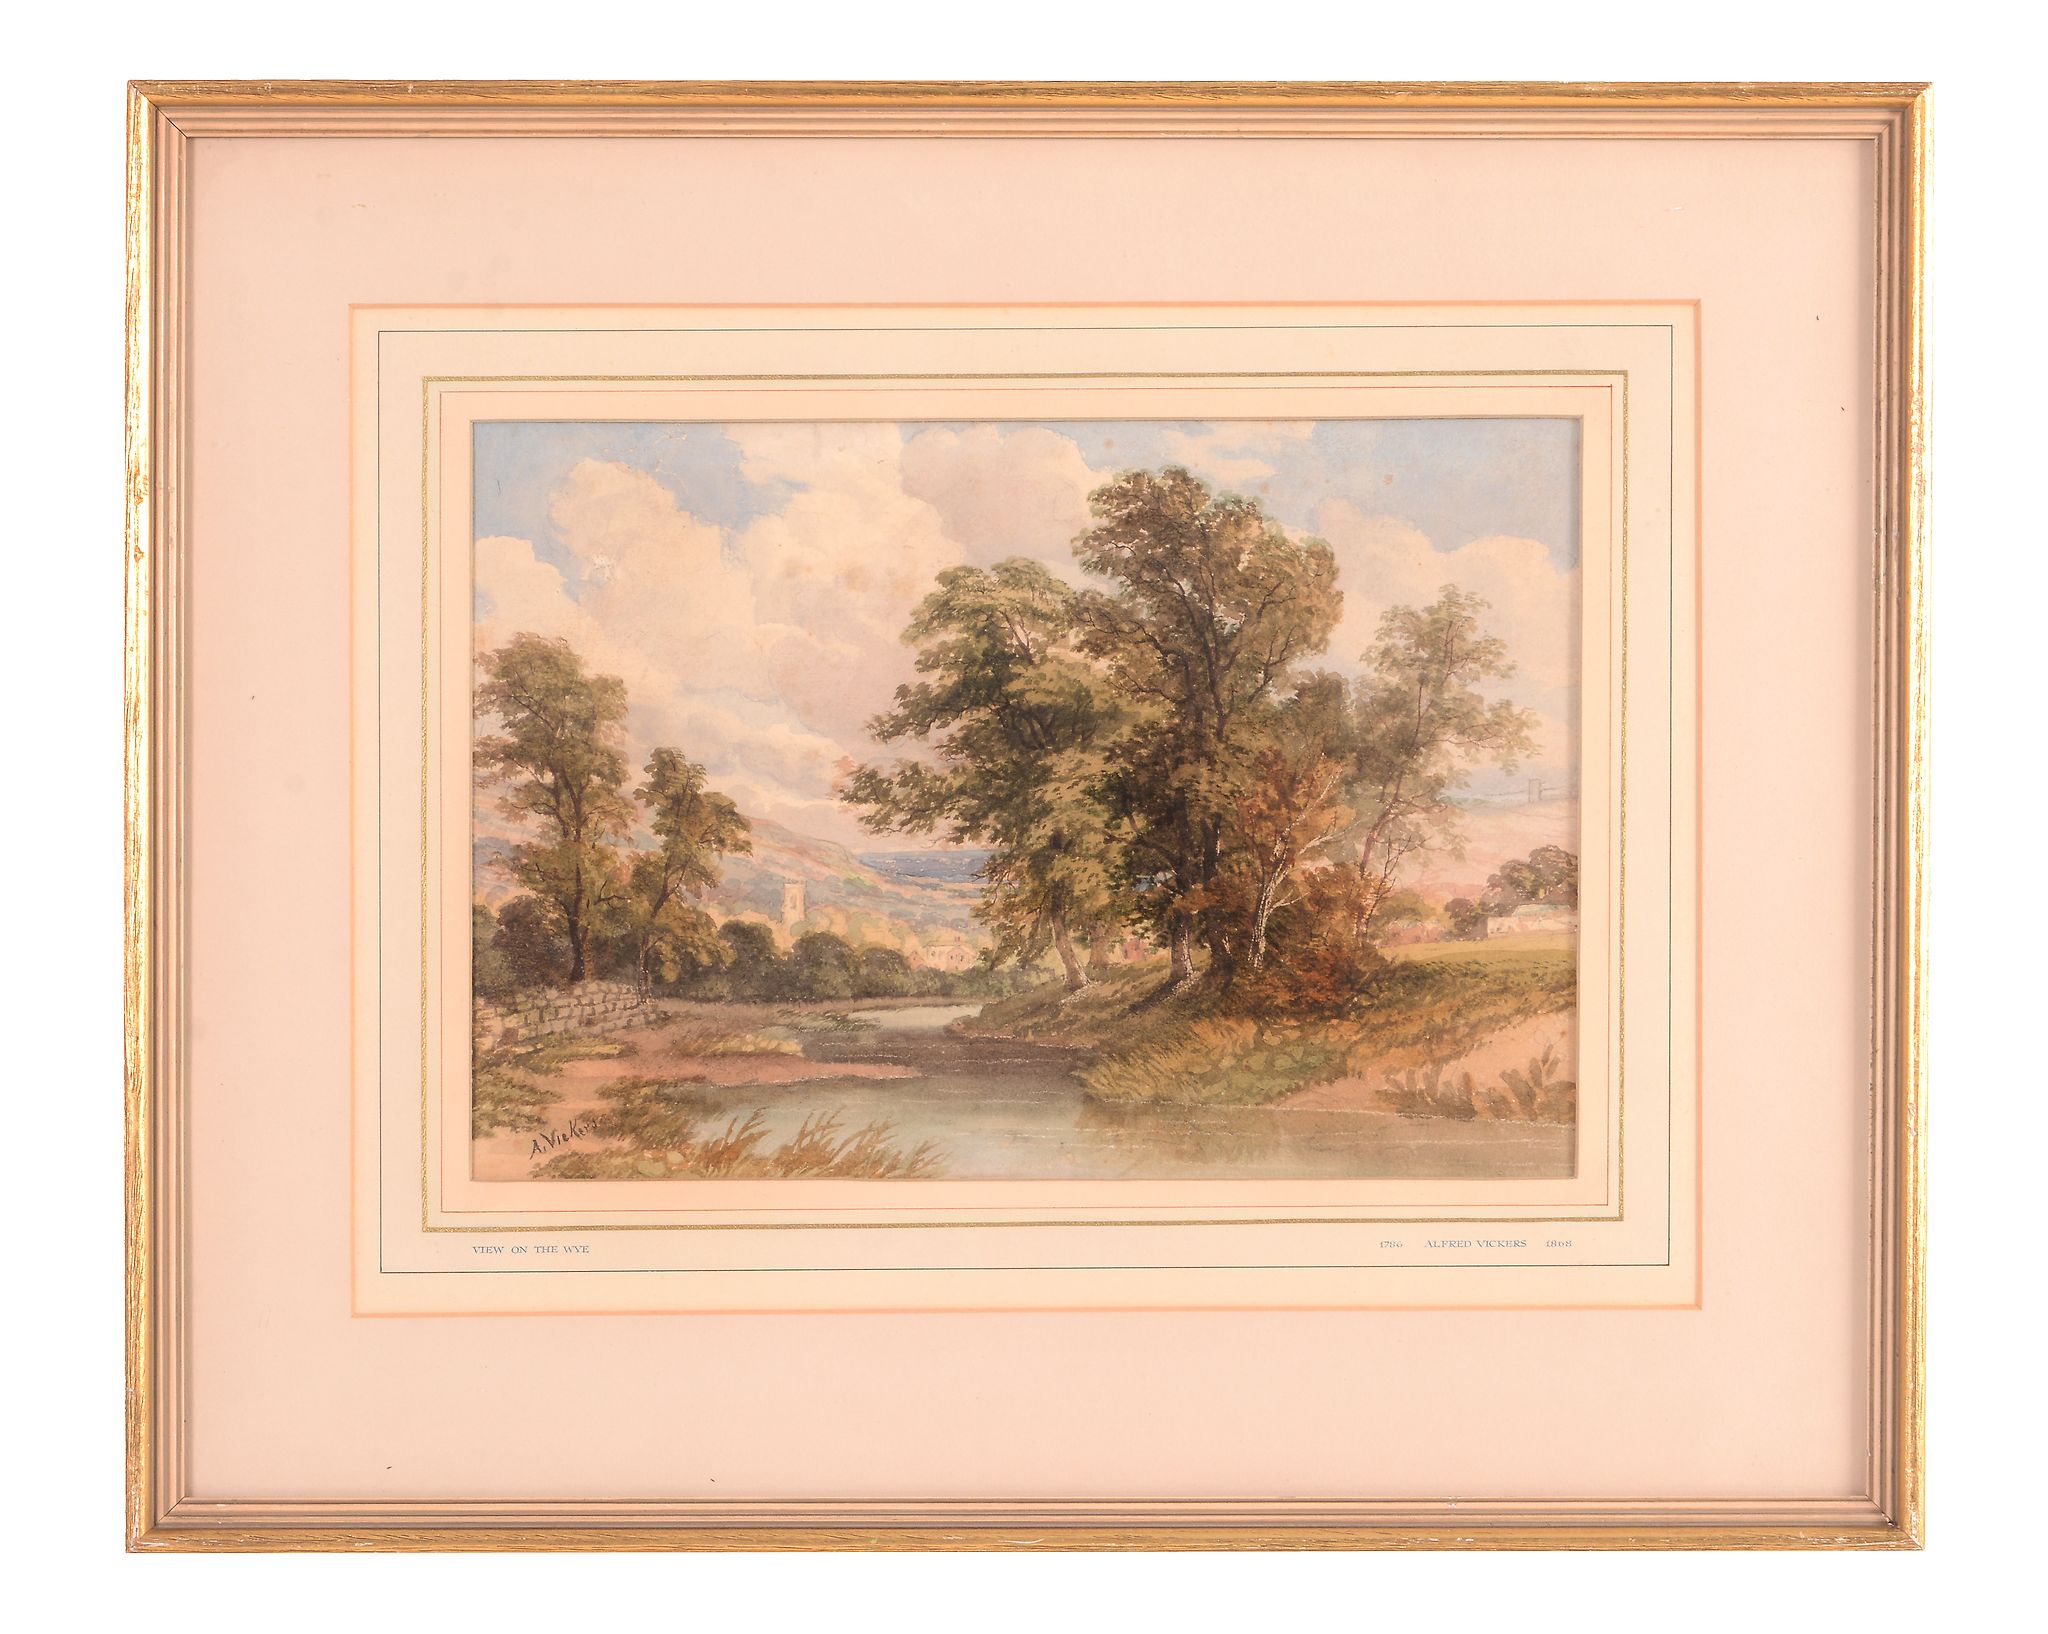 Alfred Vickers (1786-1868) - View on the Wye Watercolour over graphite, with scratching out, on wove - Image 2 of 3